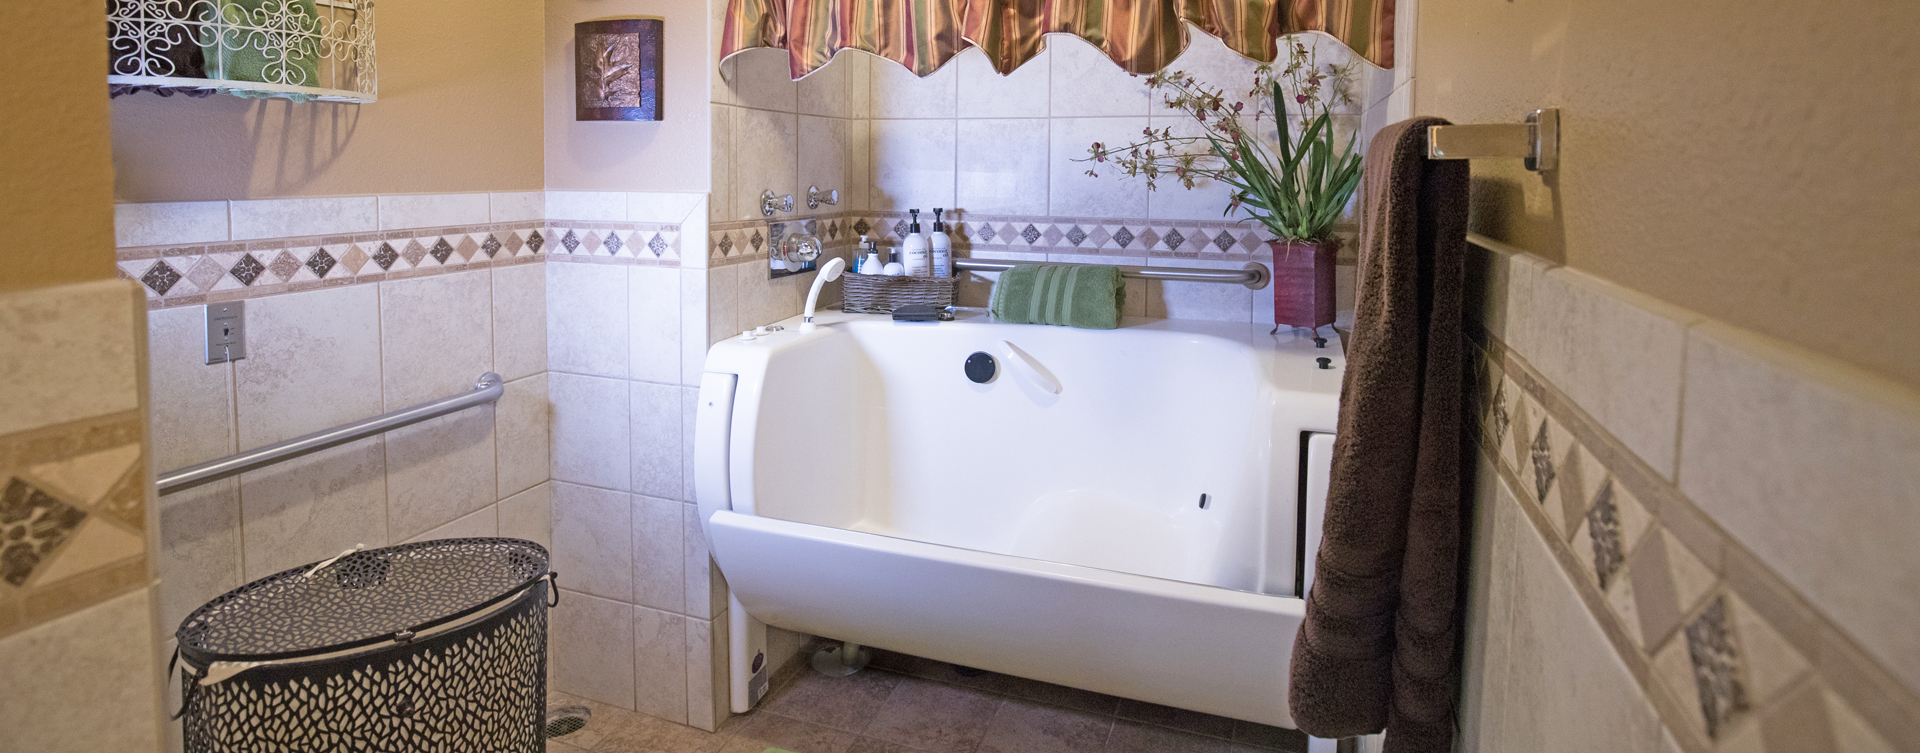 Our whirlpool bathtub creates a spa-like environment tailored to enhance your relaxation and enjoyment at Bickford of Quincy